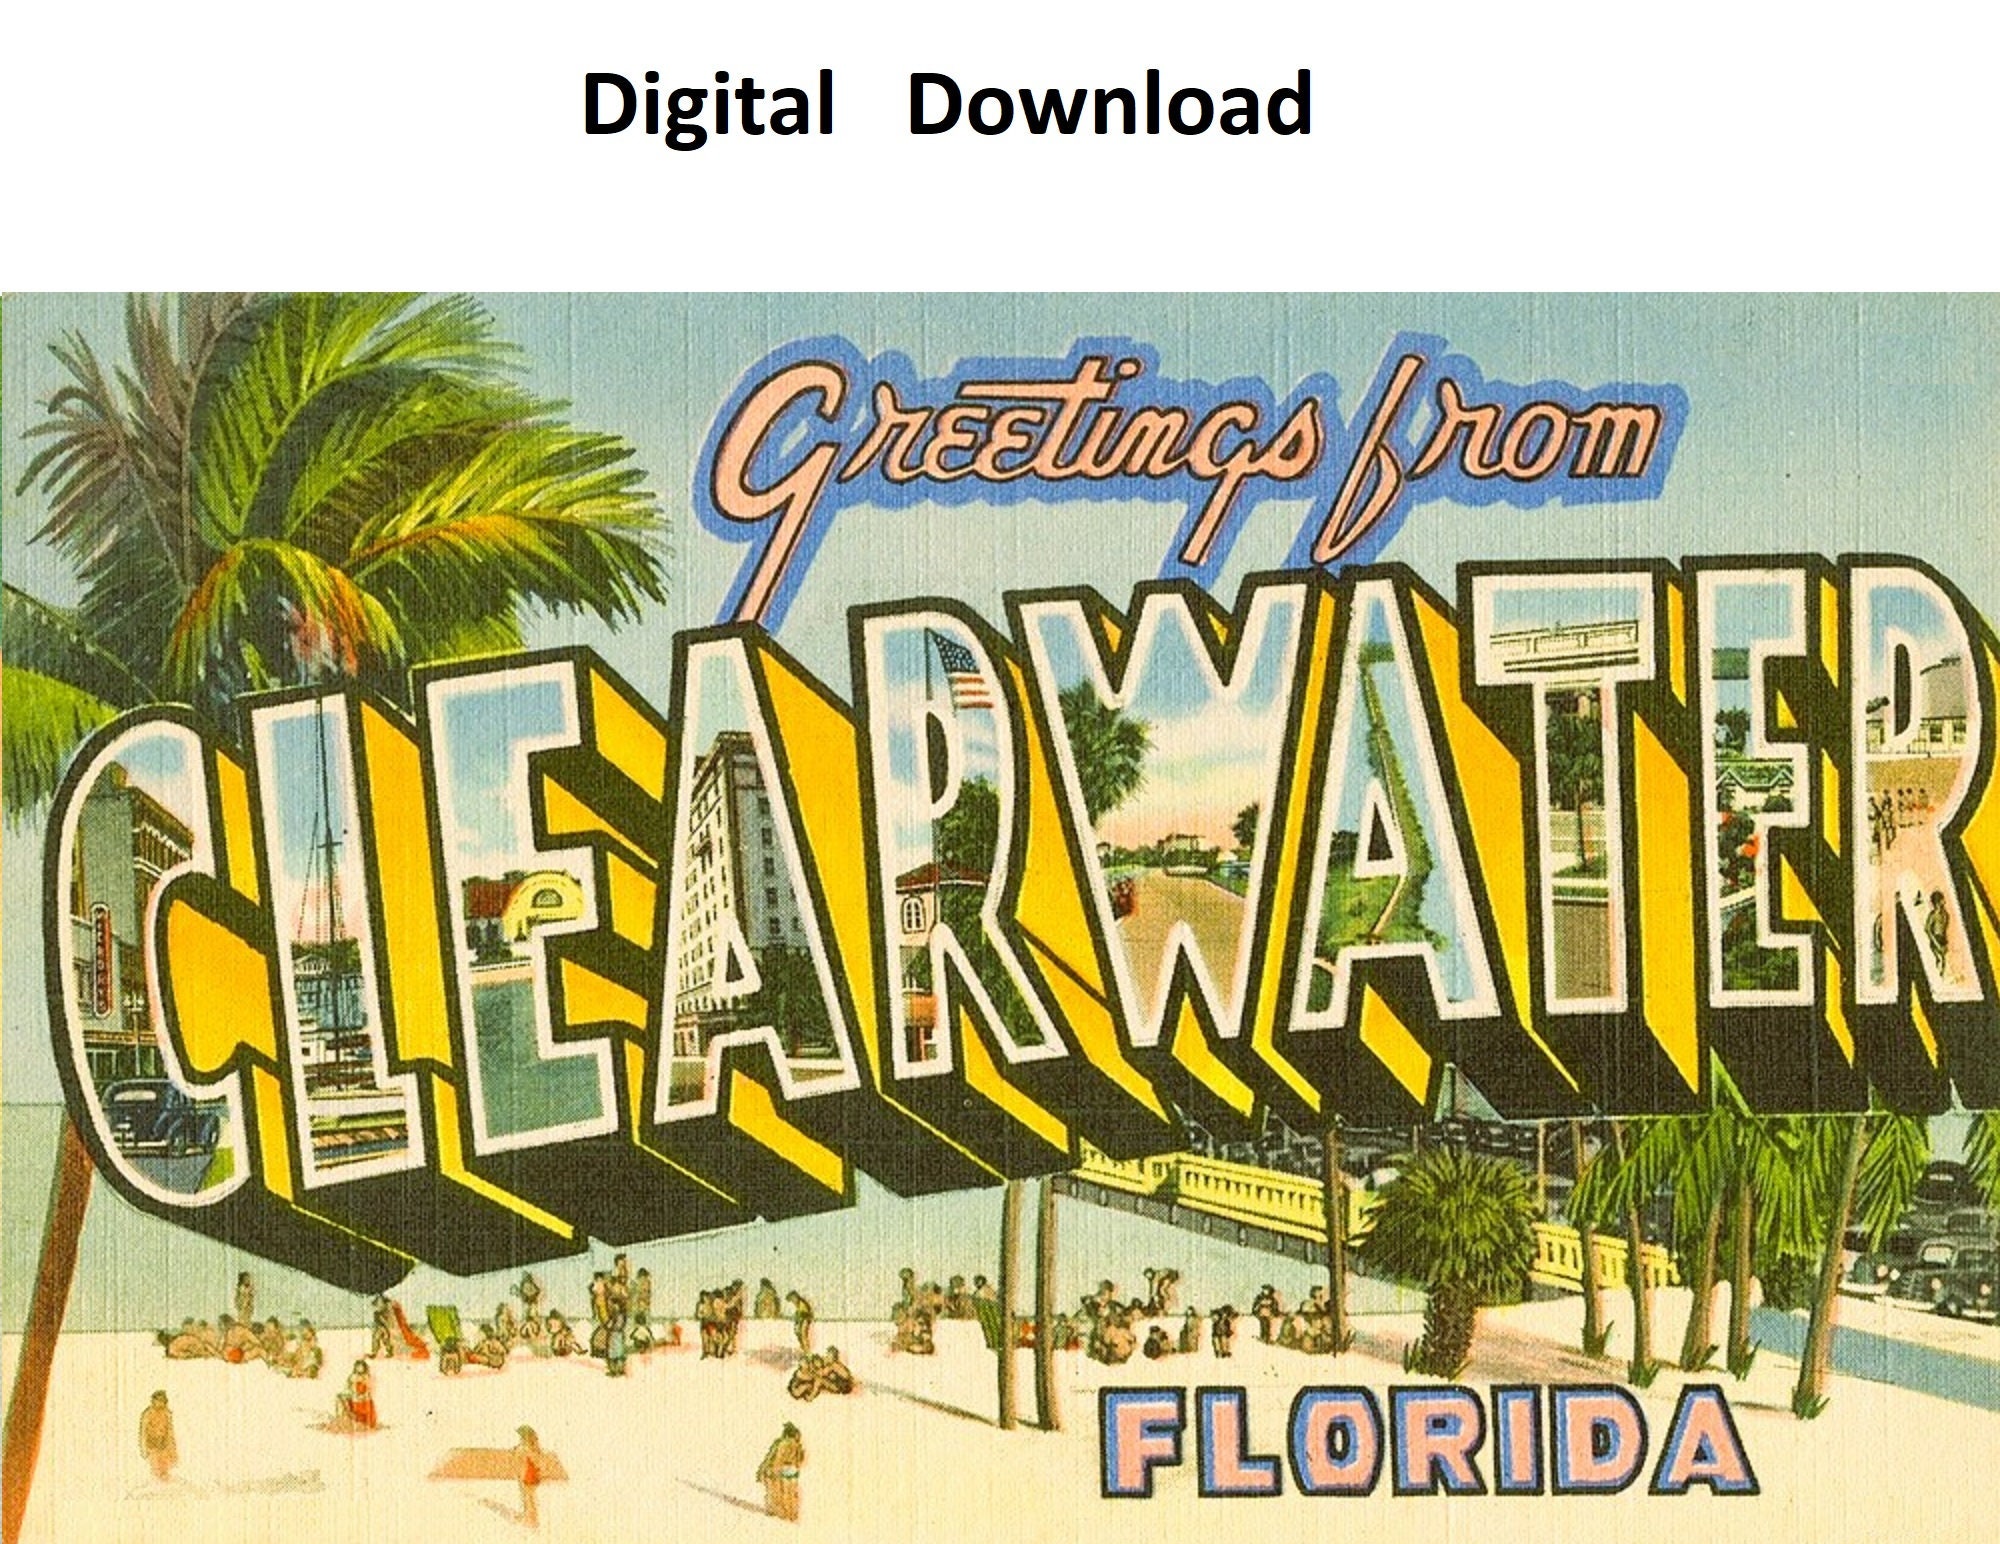 Greetings From Clearwater Florida Postcard Style 2 Digital